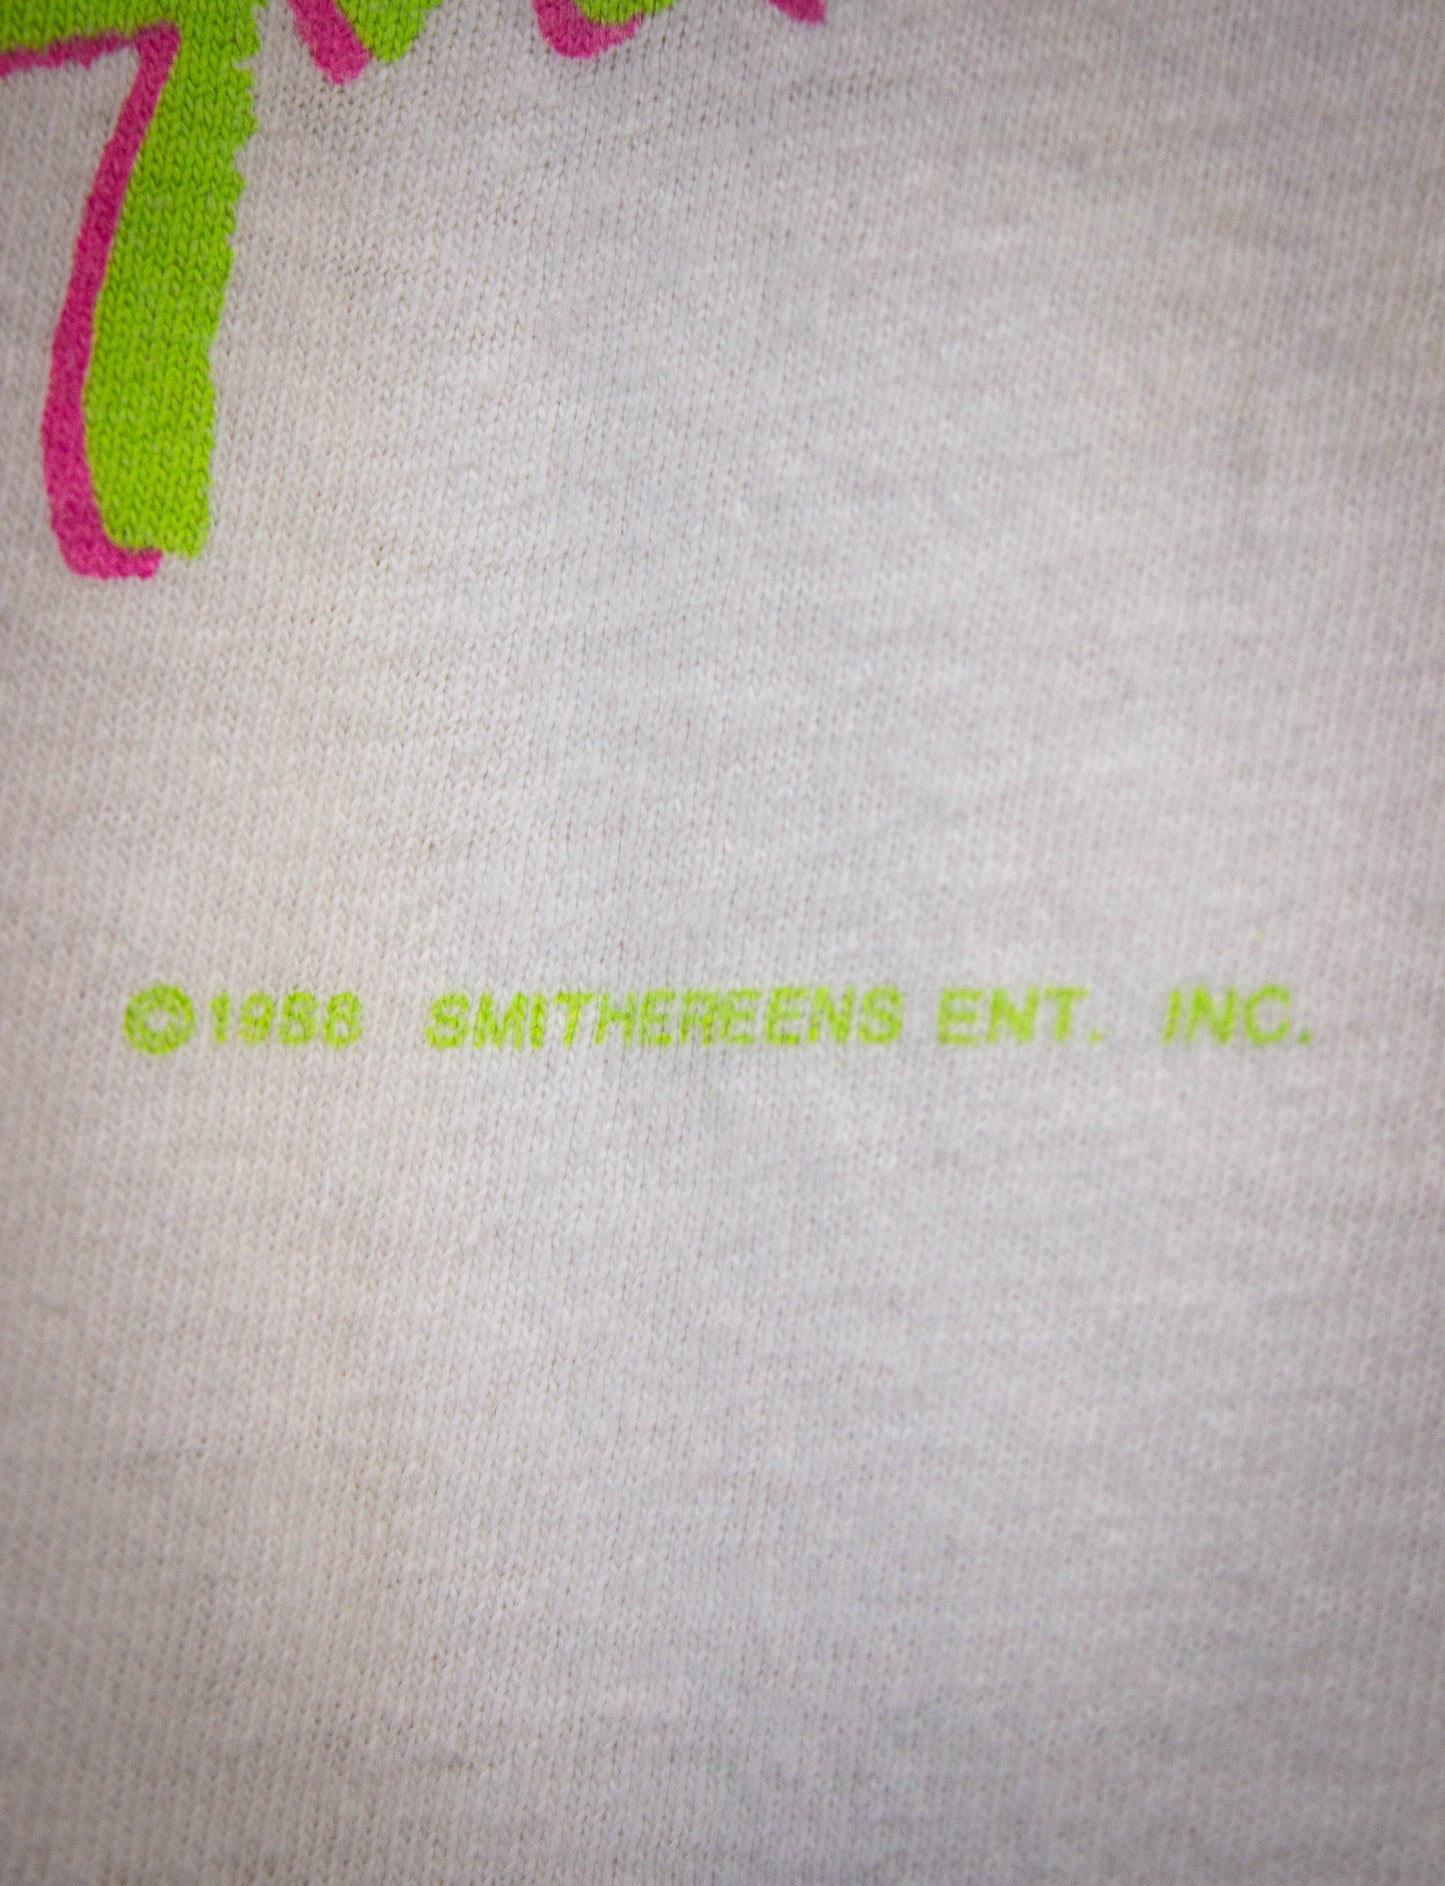 Vintage The Smithereens Green Thoughts Cut Off Concert T Shirt 1988 White Medium